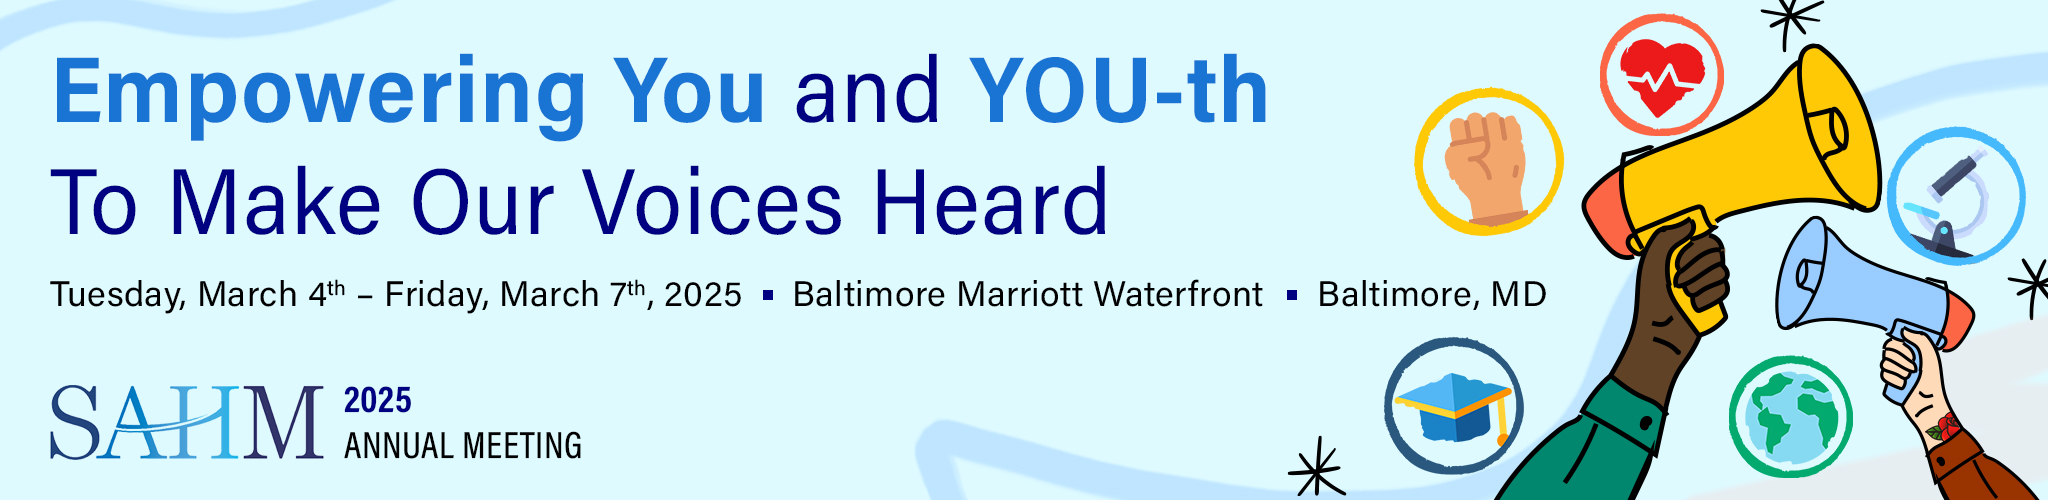 Empowering You and YOU-th To Make Our Voices Heard. Tuesday, March 4th-Friday, March 7th, 2025 - Baltimore Marriott Waterfront * Baltimore, MD, SAHM 2025 Annual